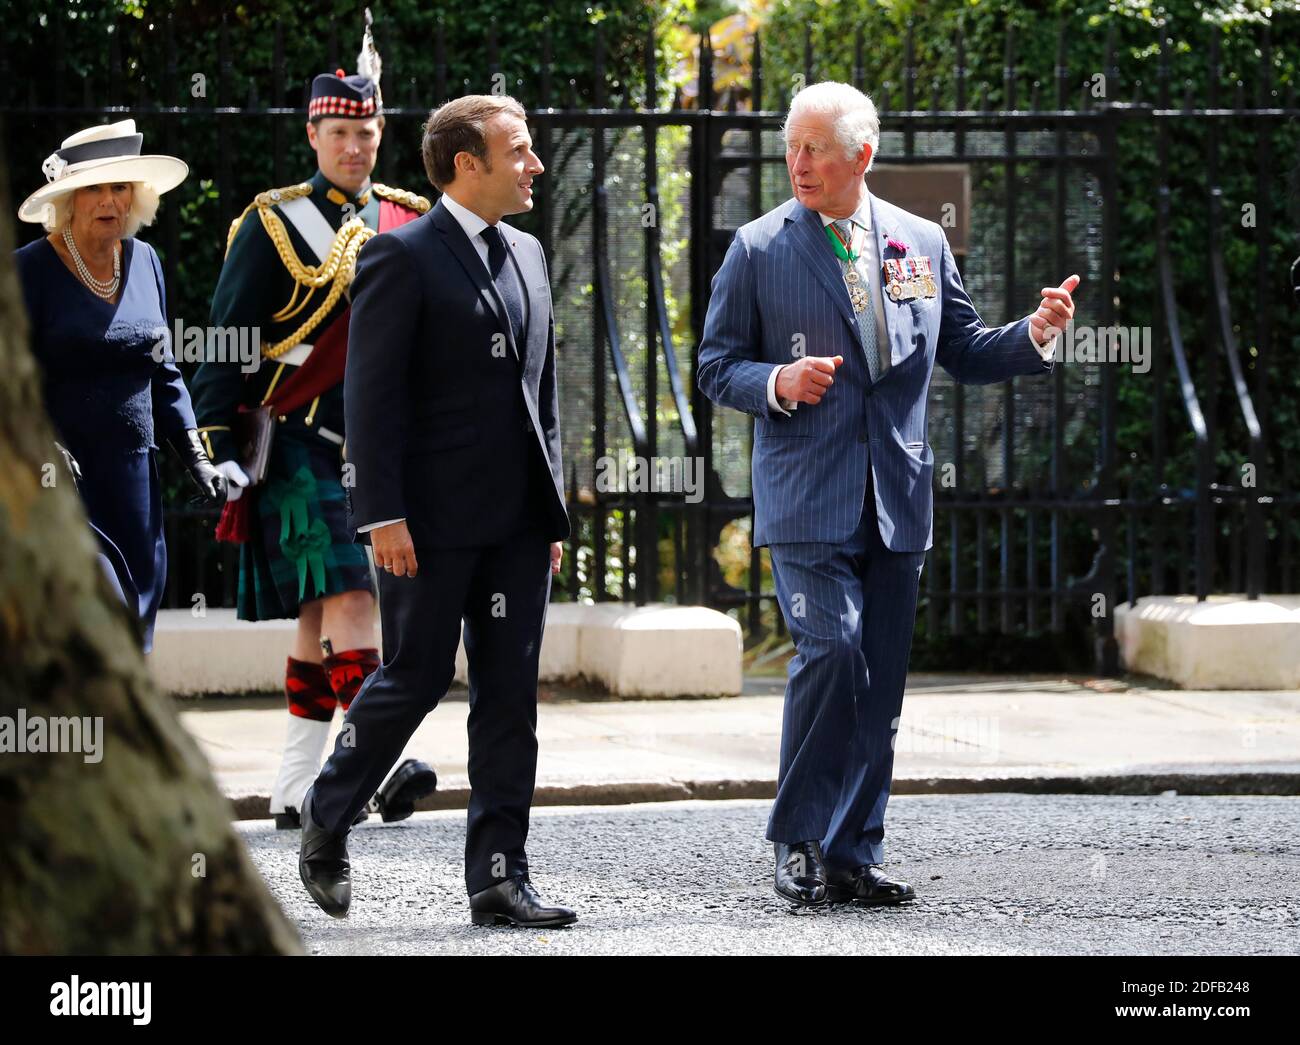 Britain's Prince Charles, Prince of Wales (R) and French President Emmanuel Macron (C) arrive to lay wreaths at the statue of former French president Charles de Gaulle at Carlton Gardens in central London on June 18, 2020 during a visit to mark the anniversary of former de Gaulle's appeal to French people to resist the Nazi occupation. - Macron visited London on June 18 to commemorate the 80th anniversary of former French president Charles de Gaulle's appeal to French people to resist the Nazi occupation during World War II. Photo by Tolga AKMEN/Pool/ABACAPRESS.COM Stock Photo